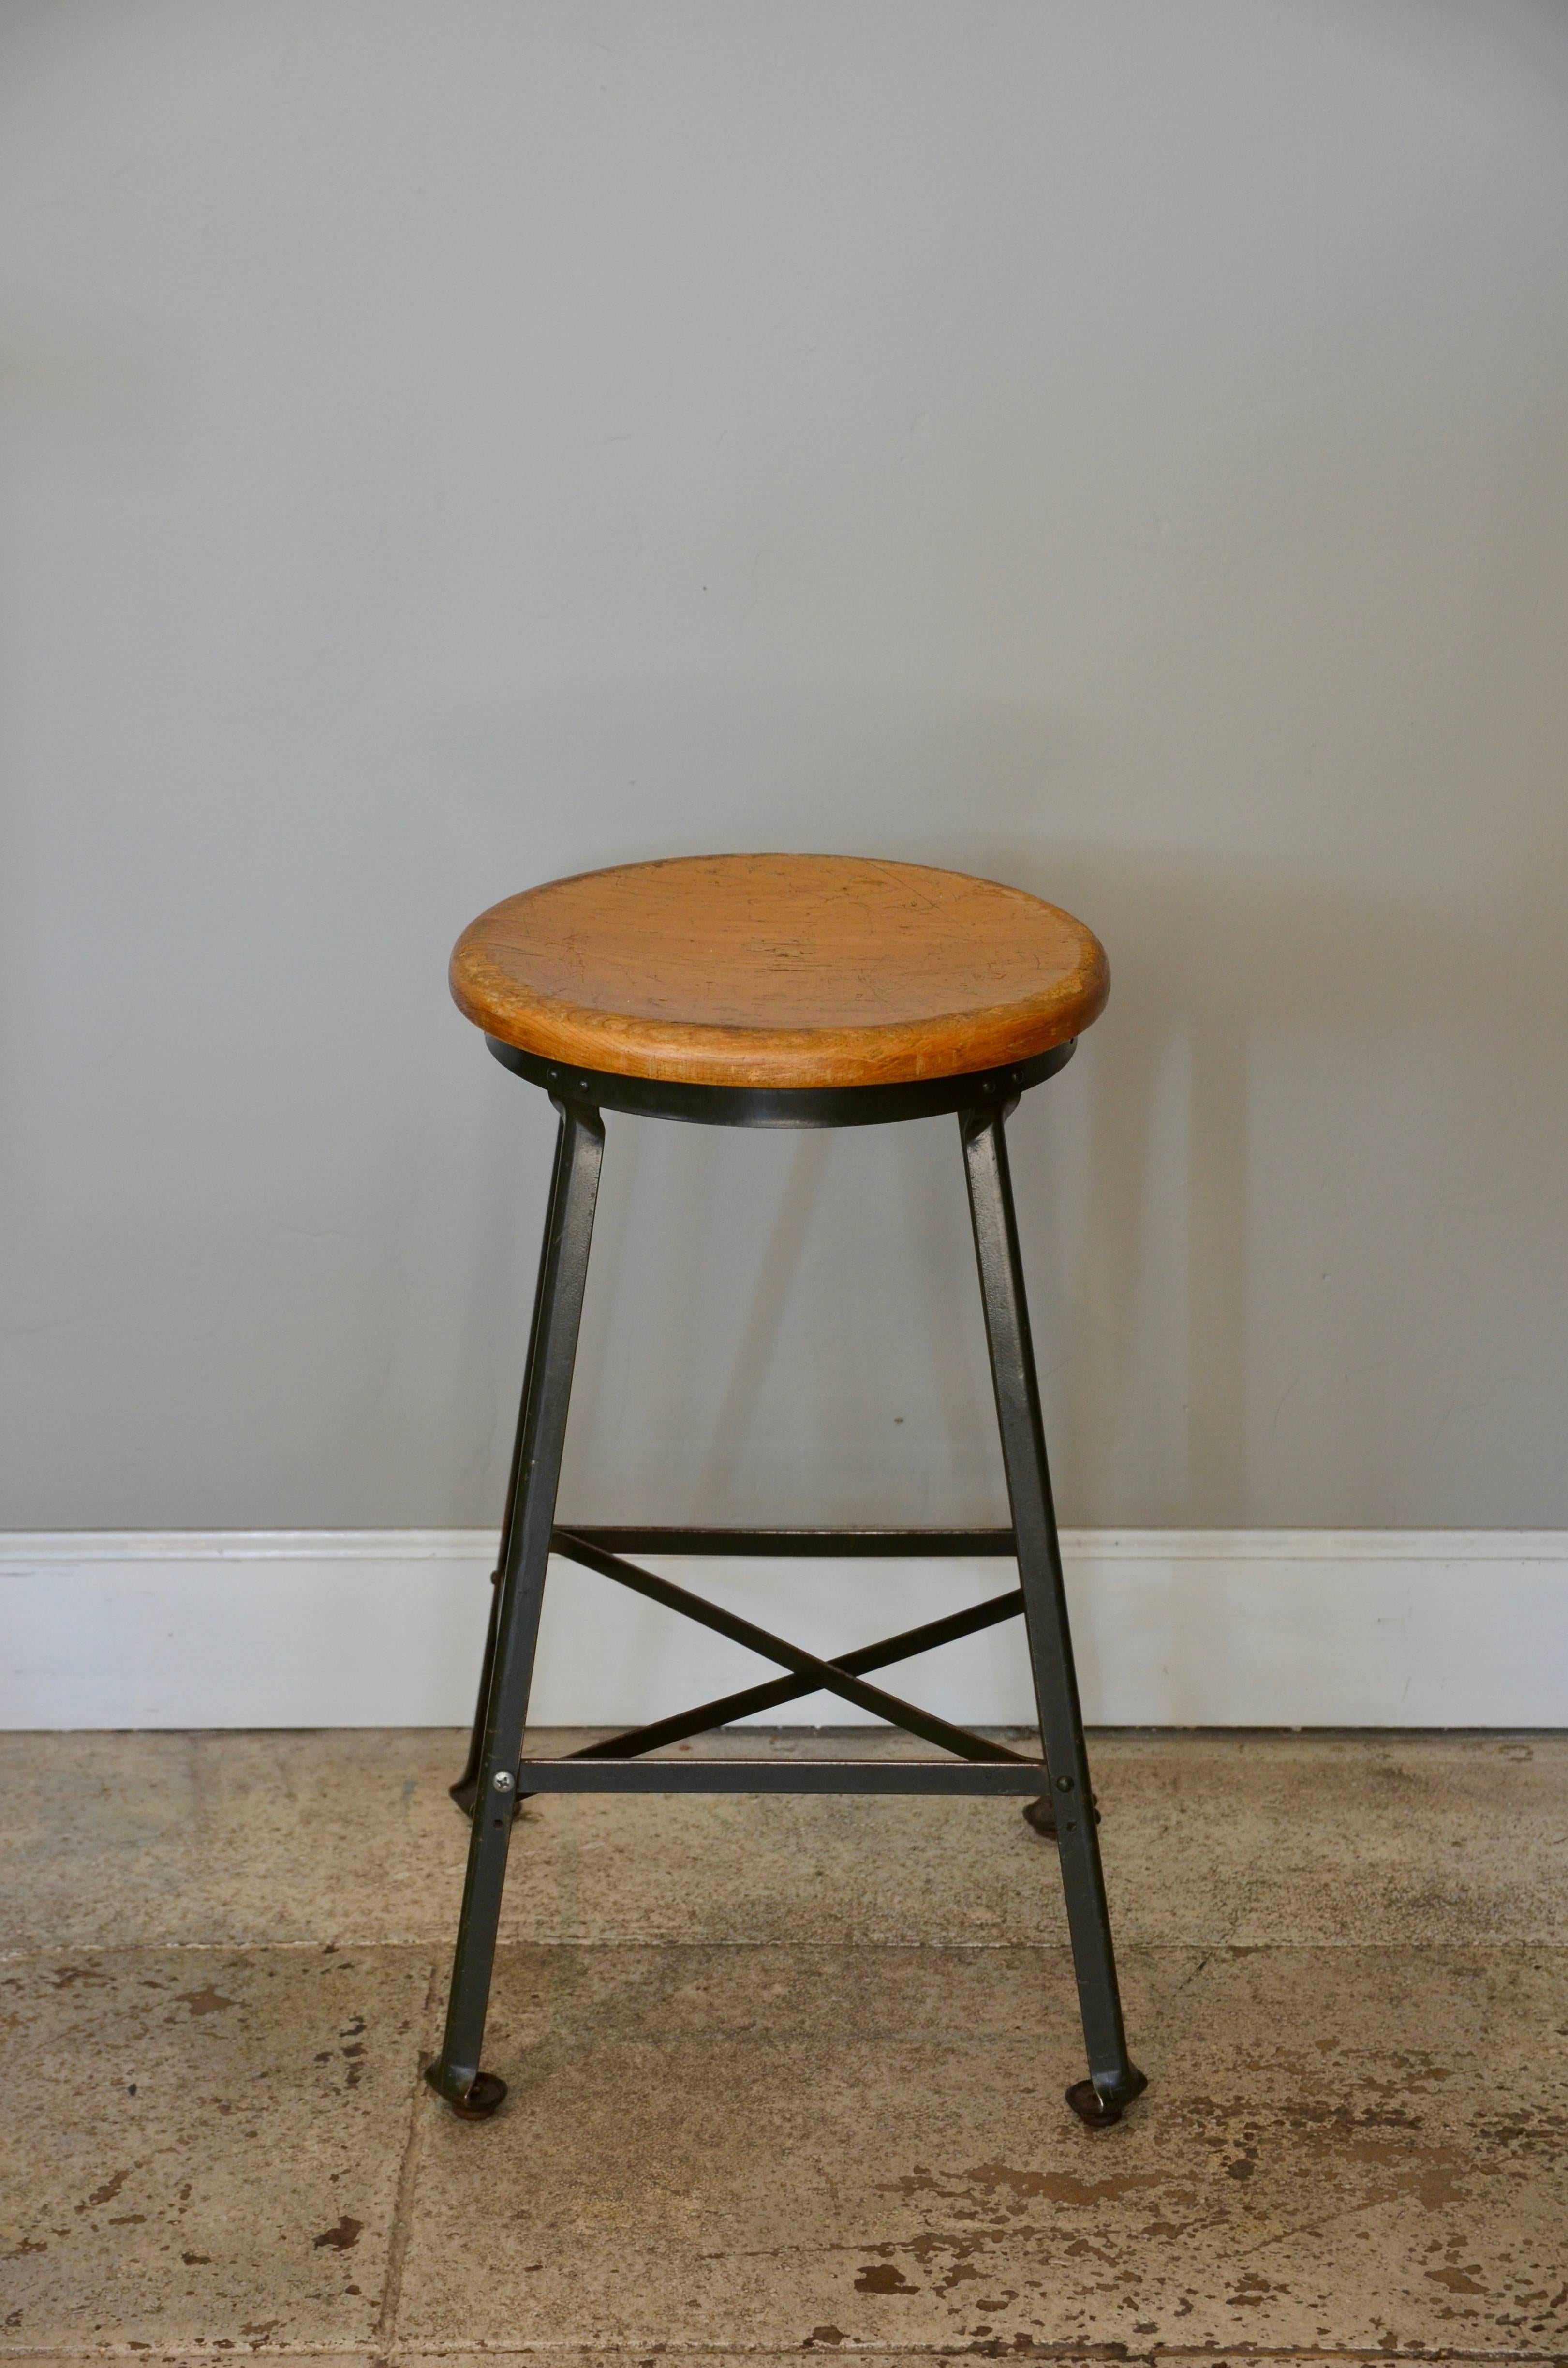 Great set of four vintage Industrial steel and turned wood counter stools. Comfortable concave shaped seats.

The wood seats are 14 in. diameter.

Only sold as a set of three.